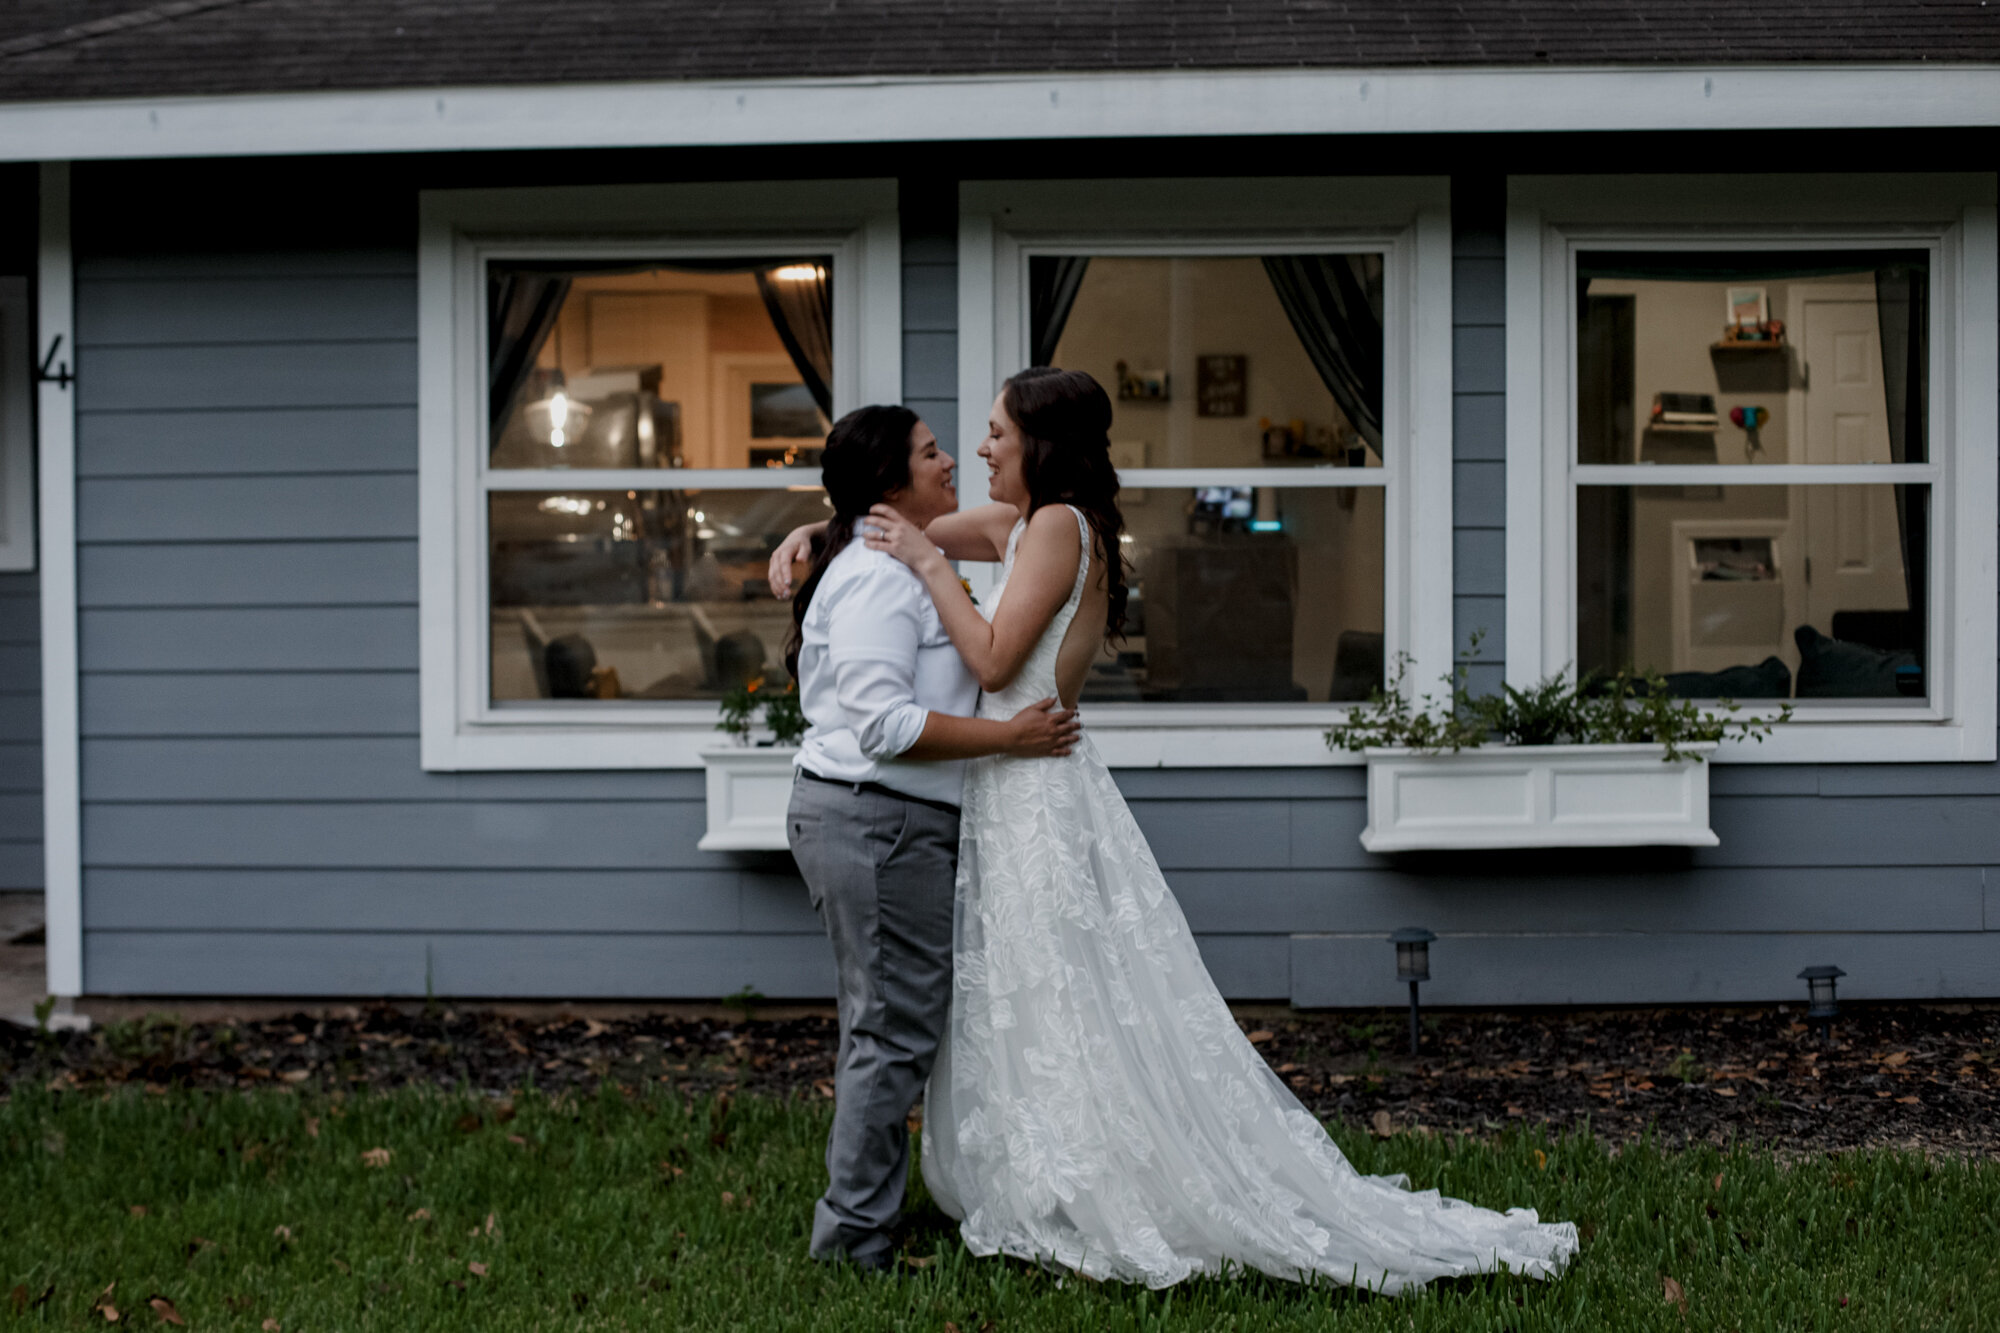 Cozy Laid-Back LGBTQ+ Backyard Wedding. Brides portraits in front of the house.